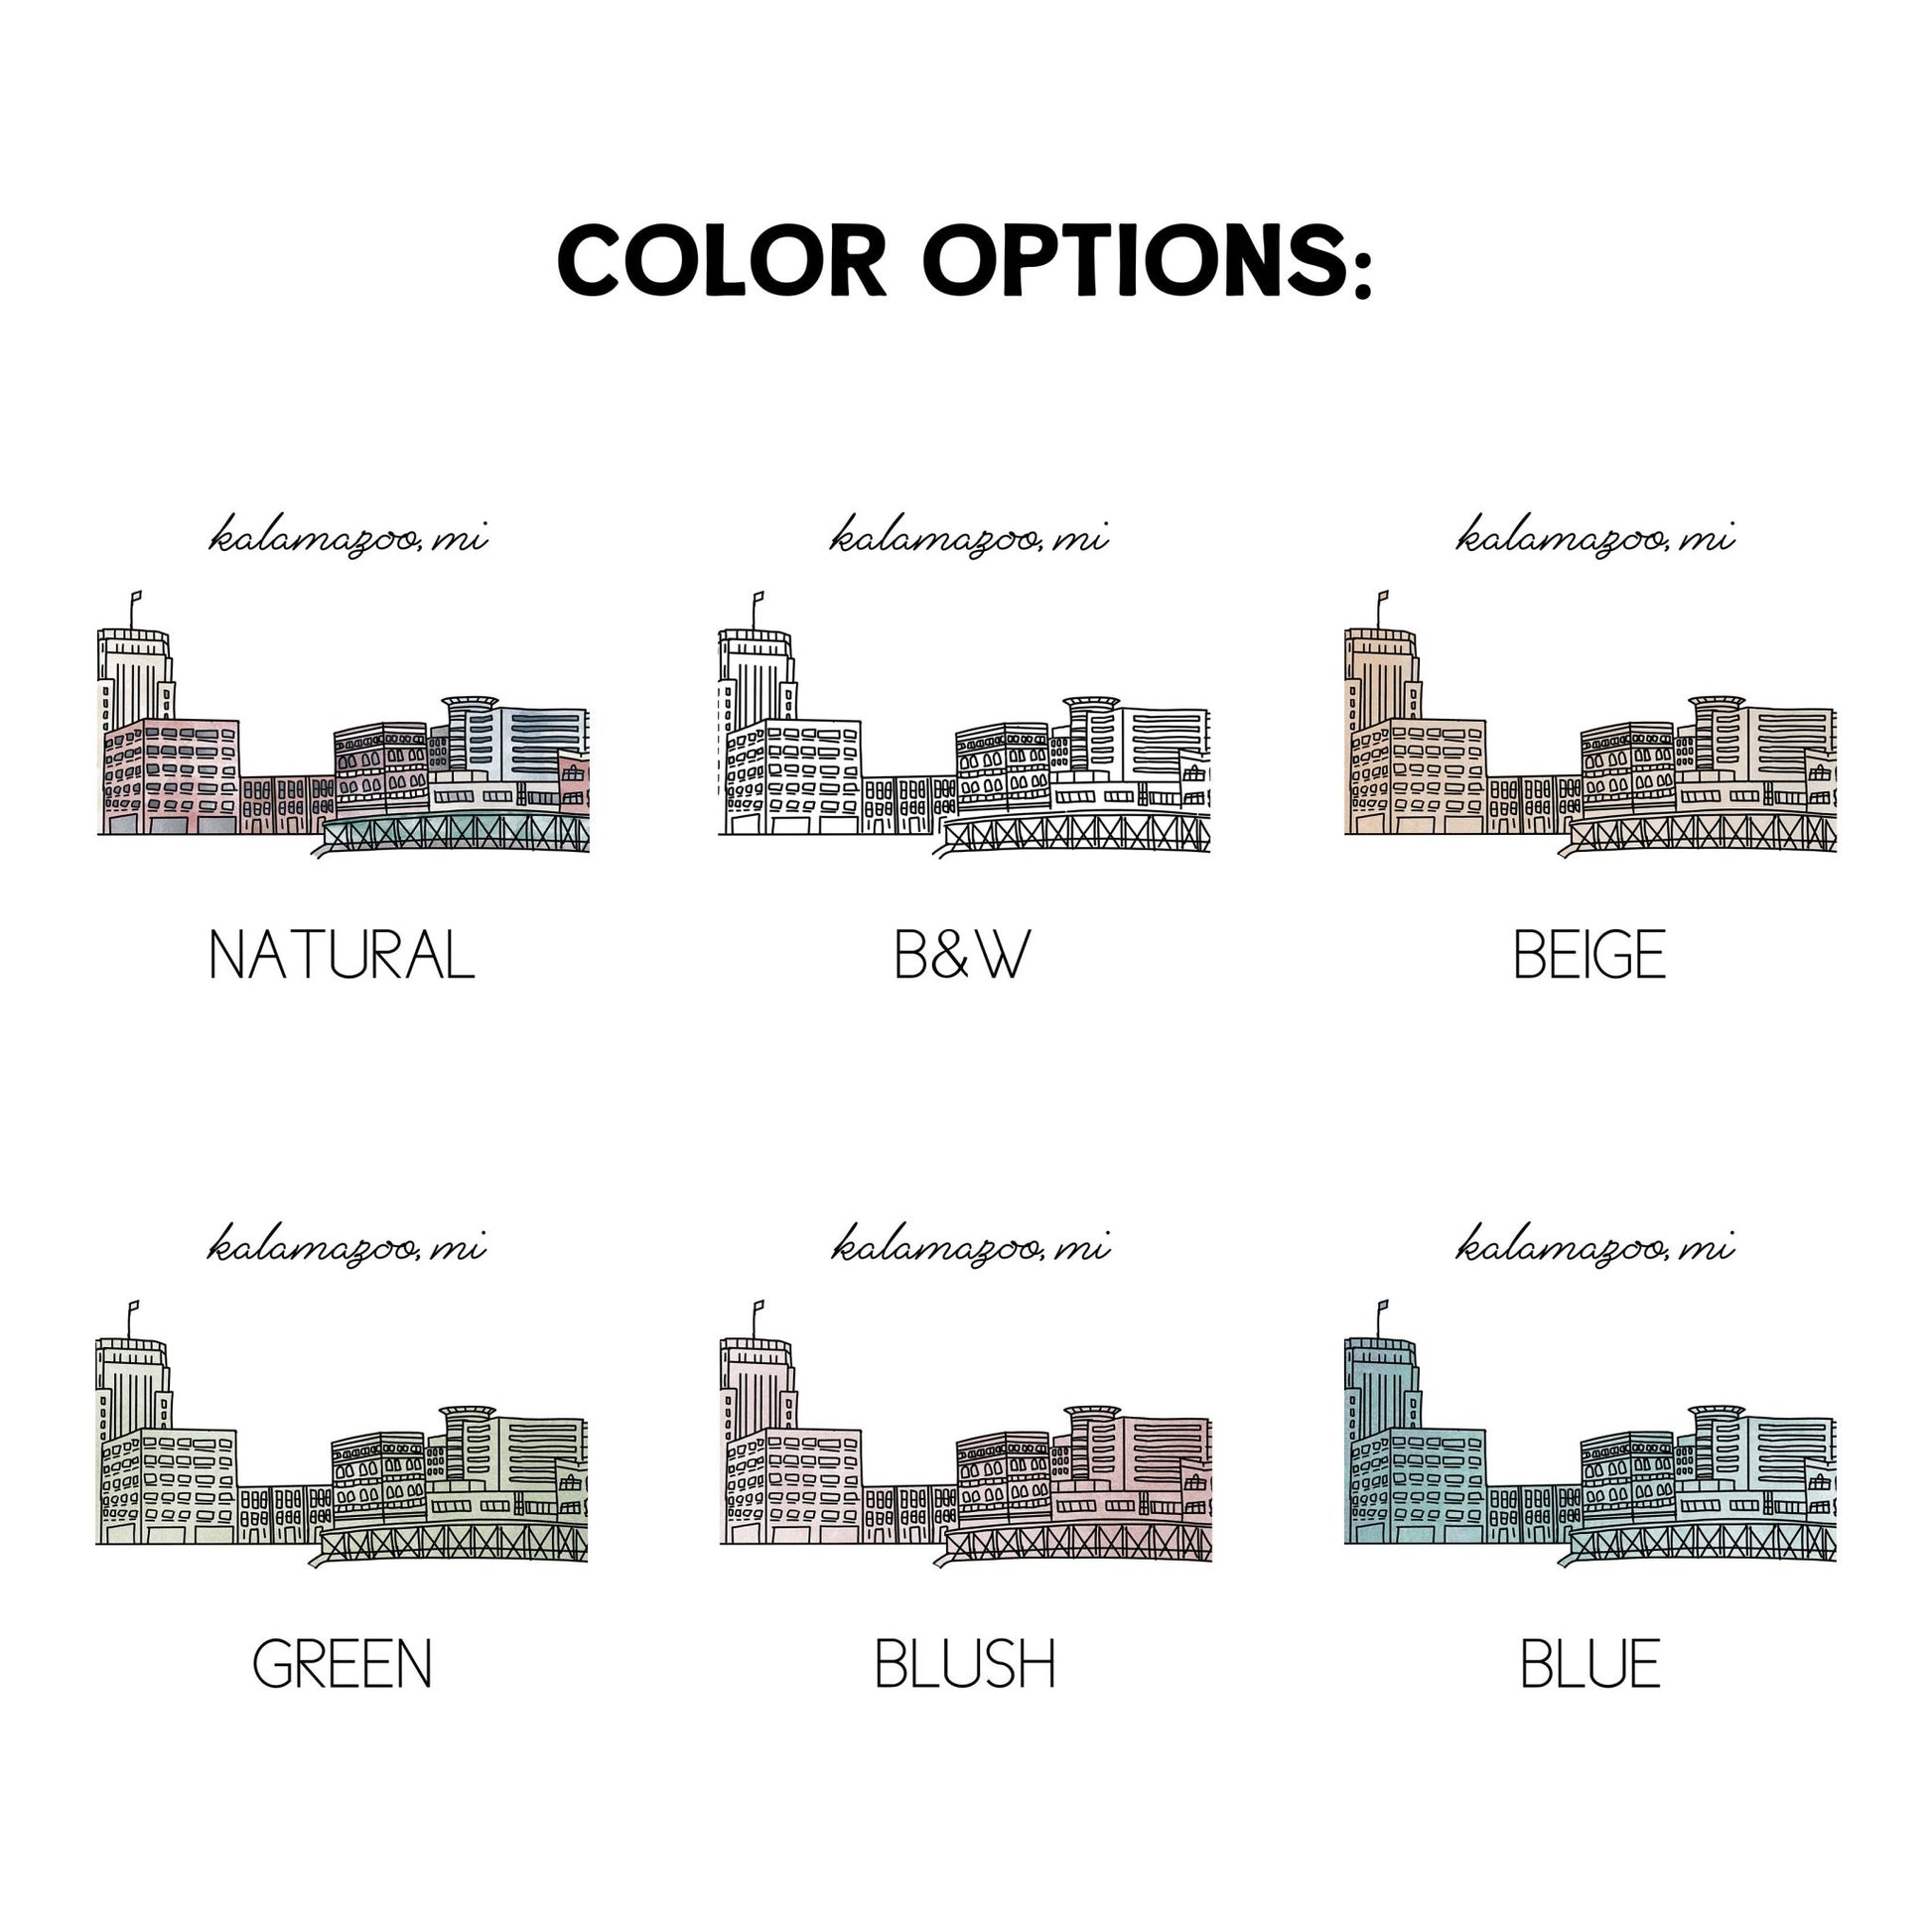 Examples of the 6 colors available for skyline drawings - natural, black and white, blue, blush, beige, and green